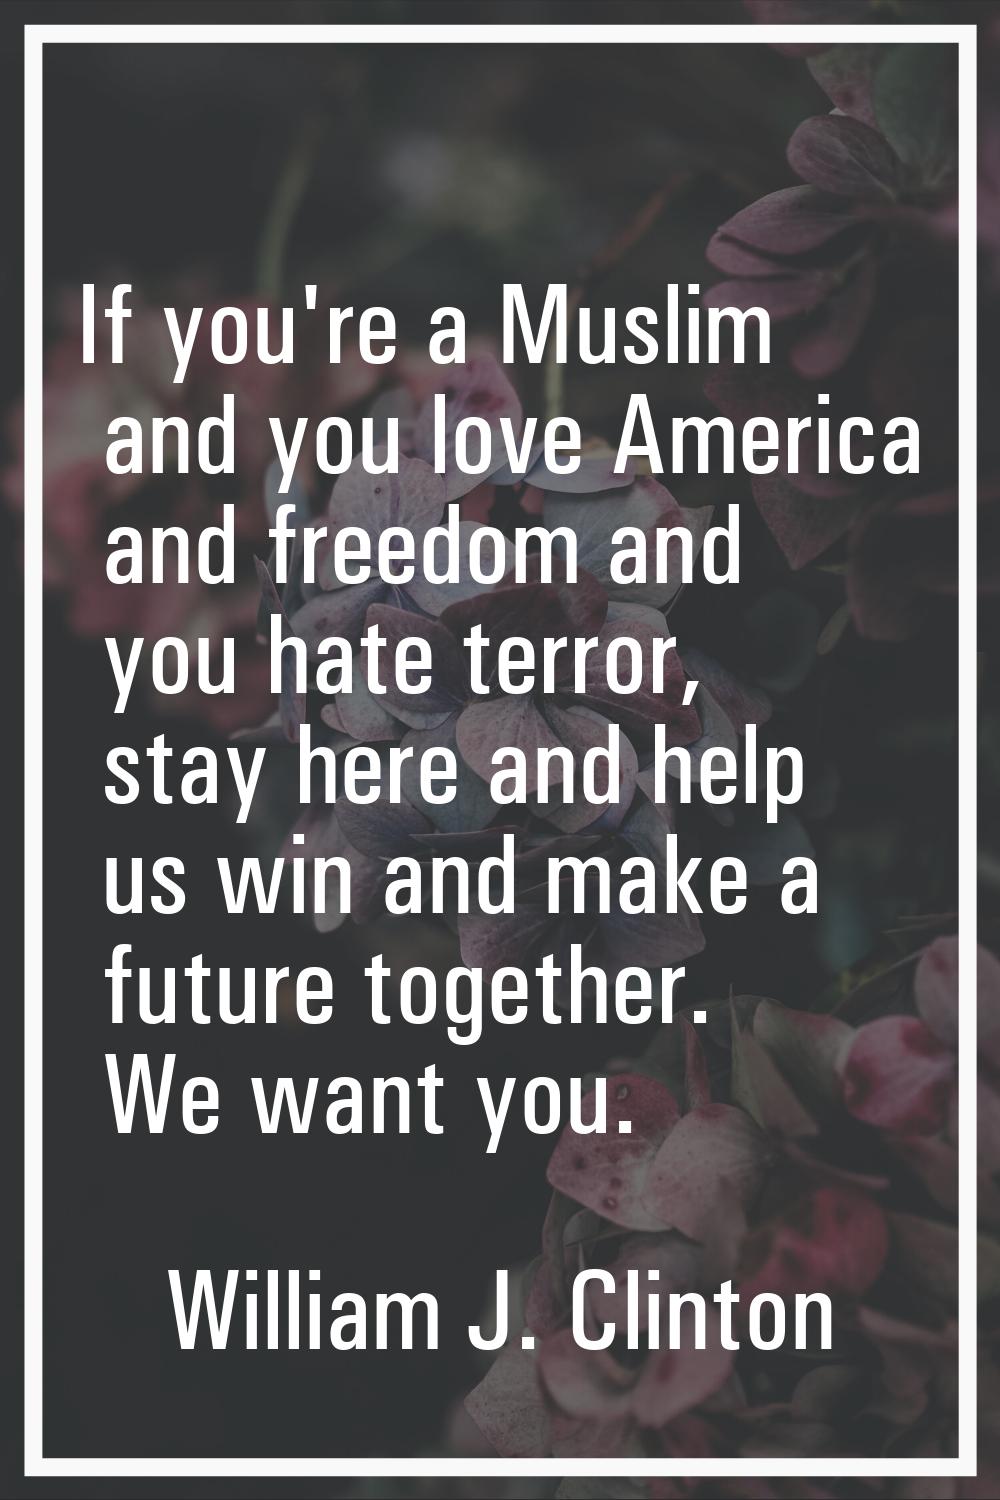 If you're a Muslim and you love America and freedom and you hate terror, stay here and help us win 